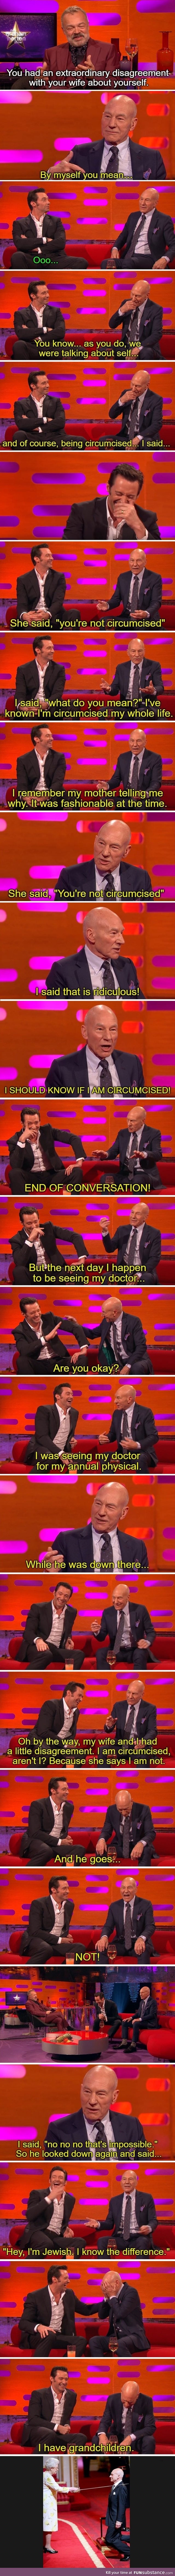 Patrick Stewart talks about his PP